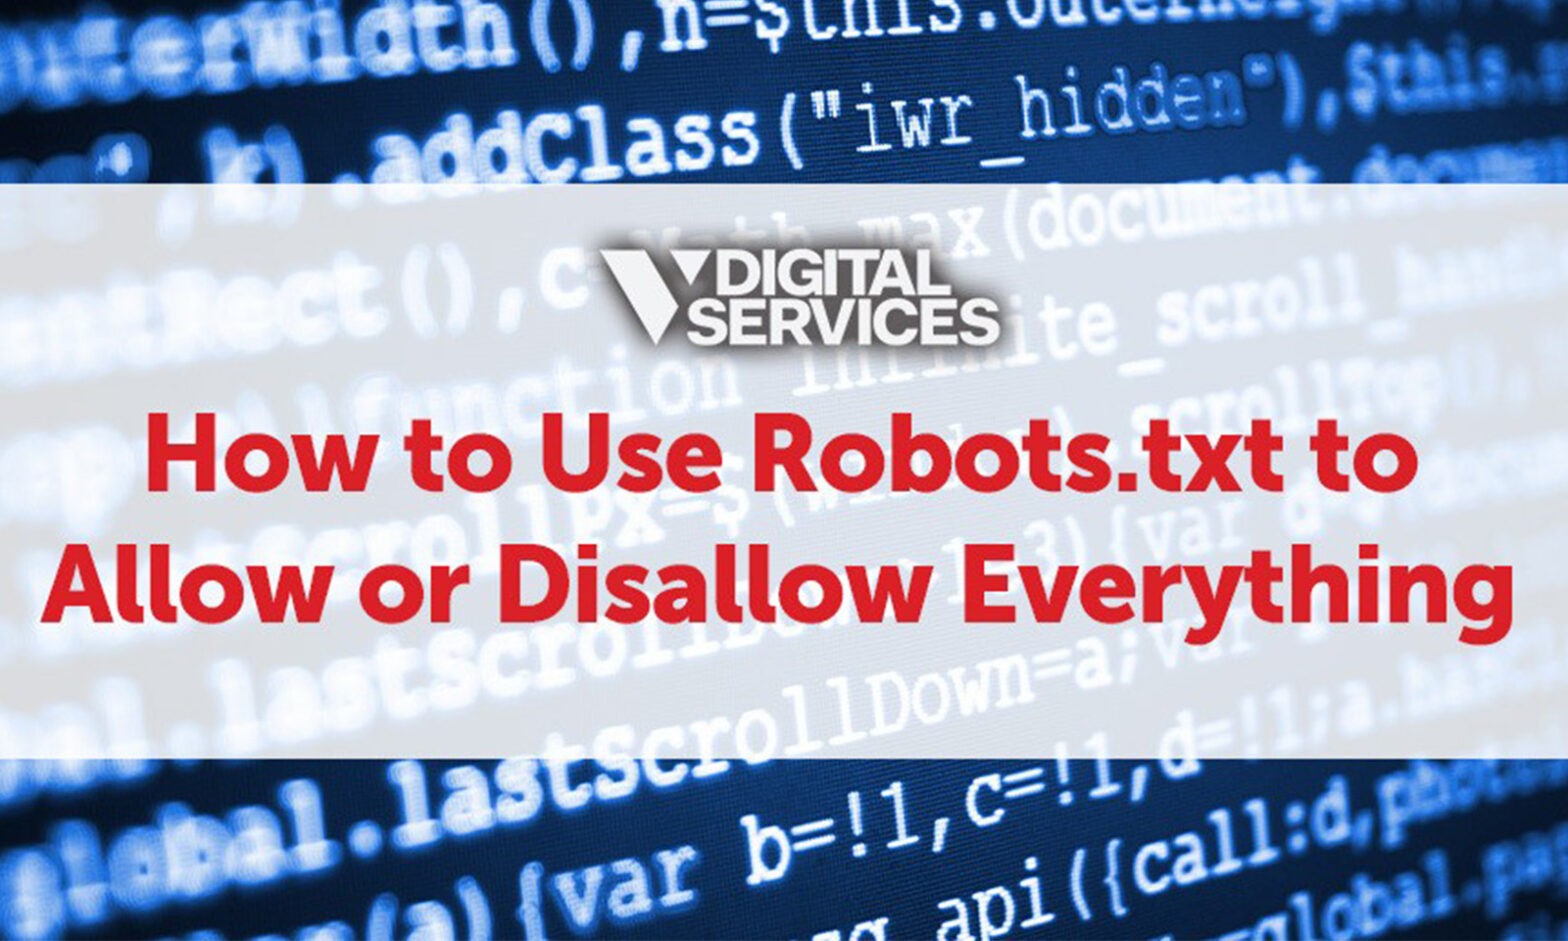 How to Use Robots.txt to Allow or Disallow Everything. Blog Post